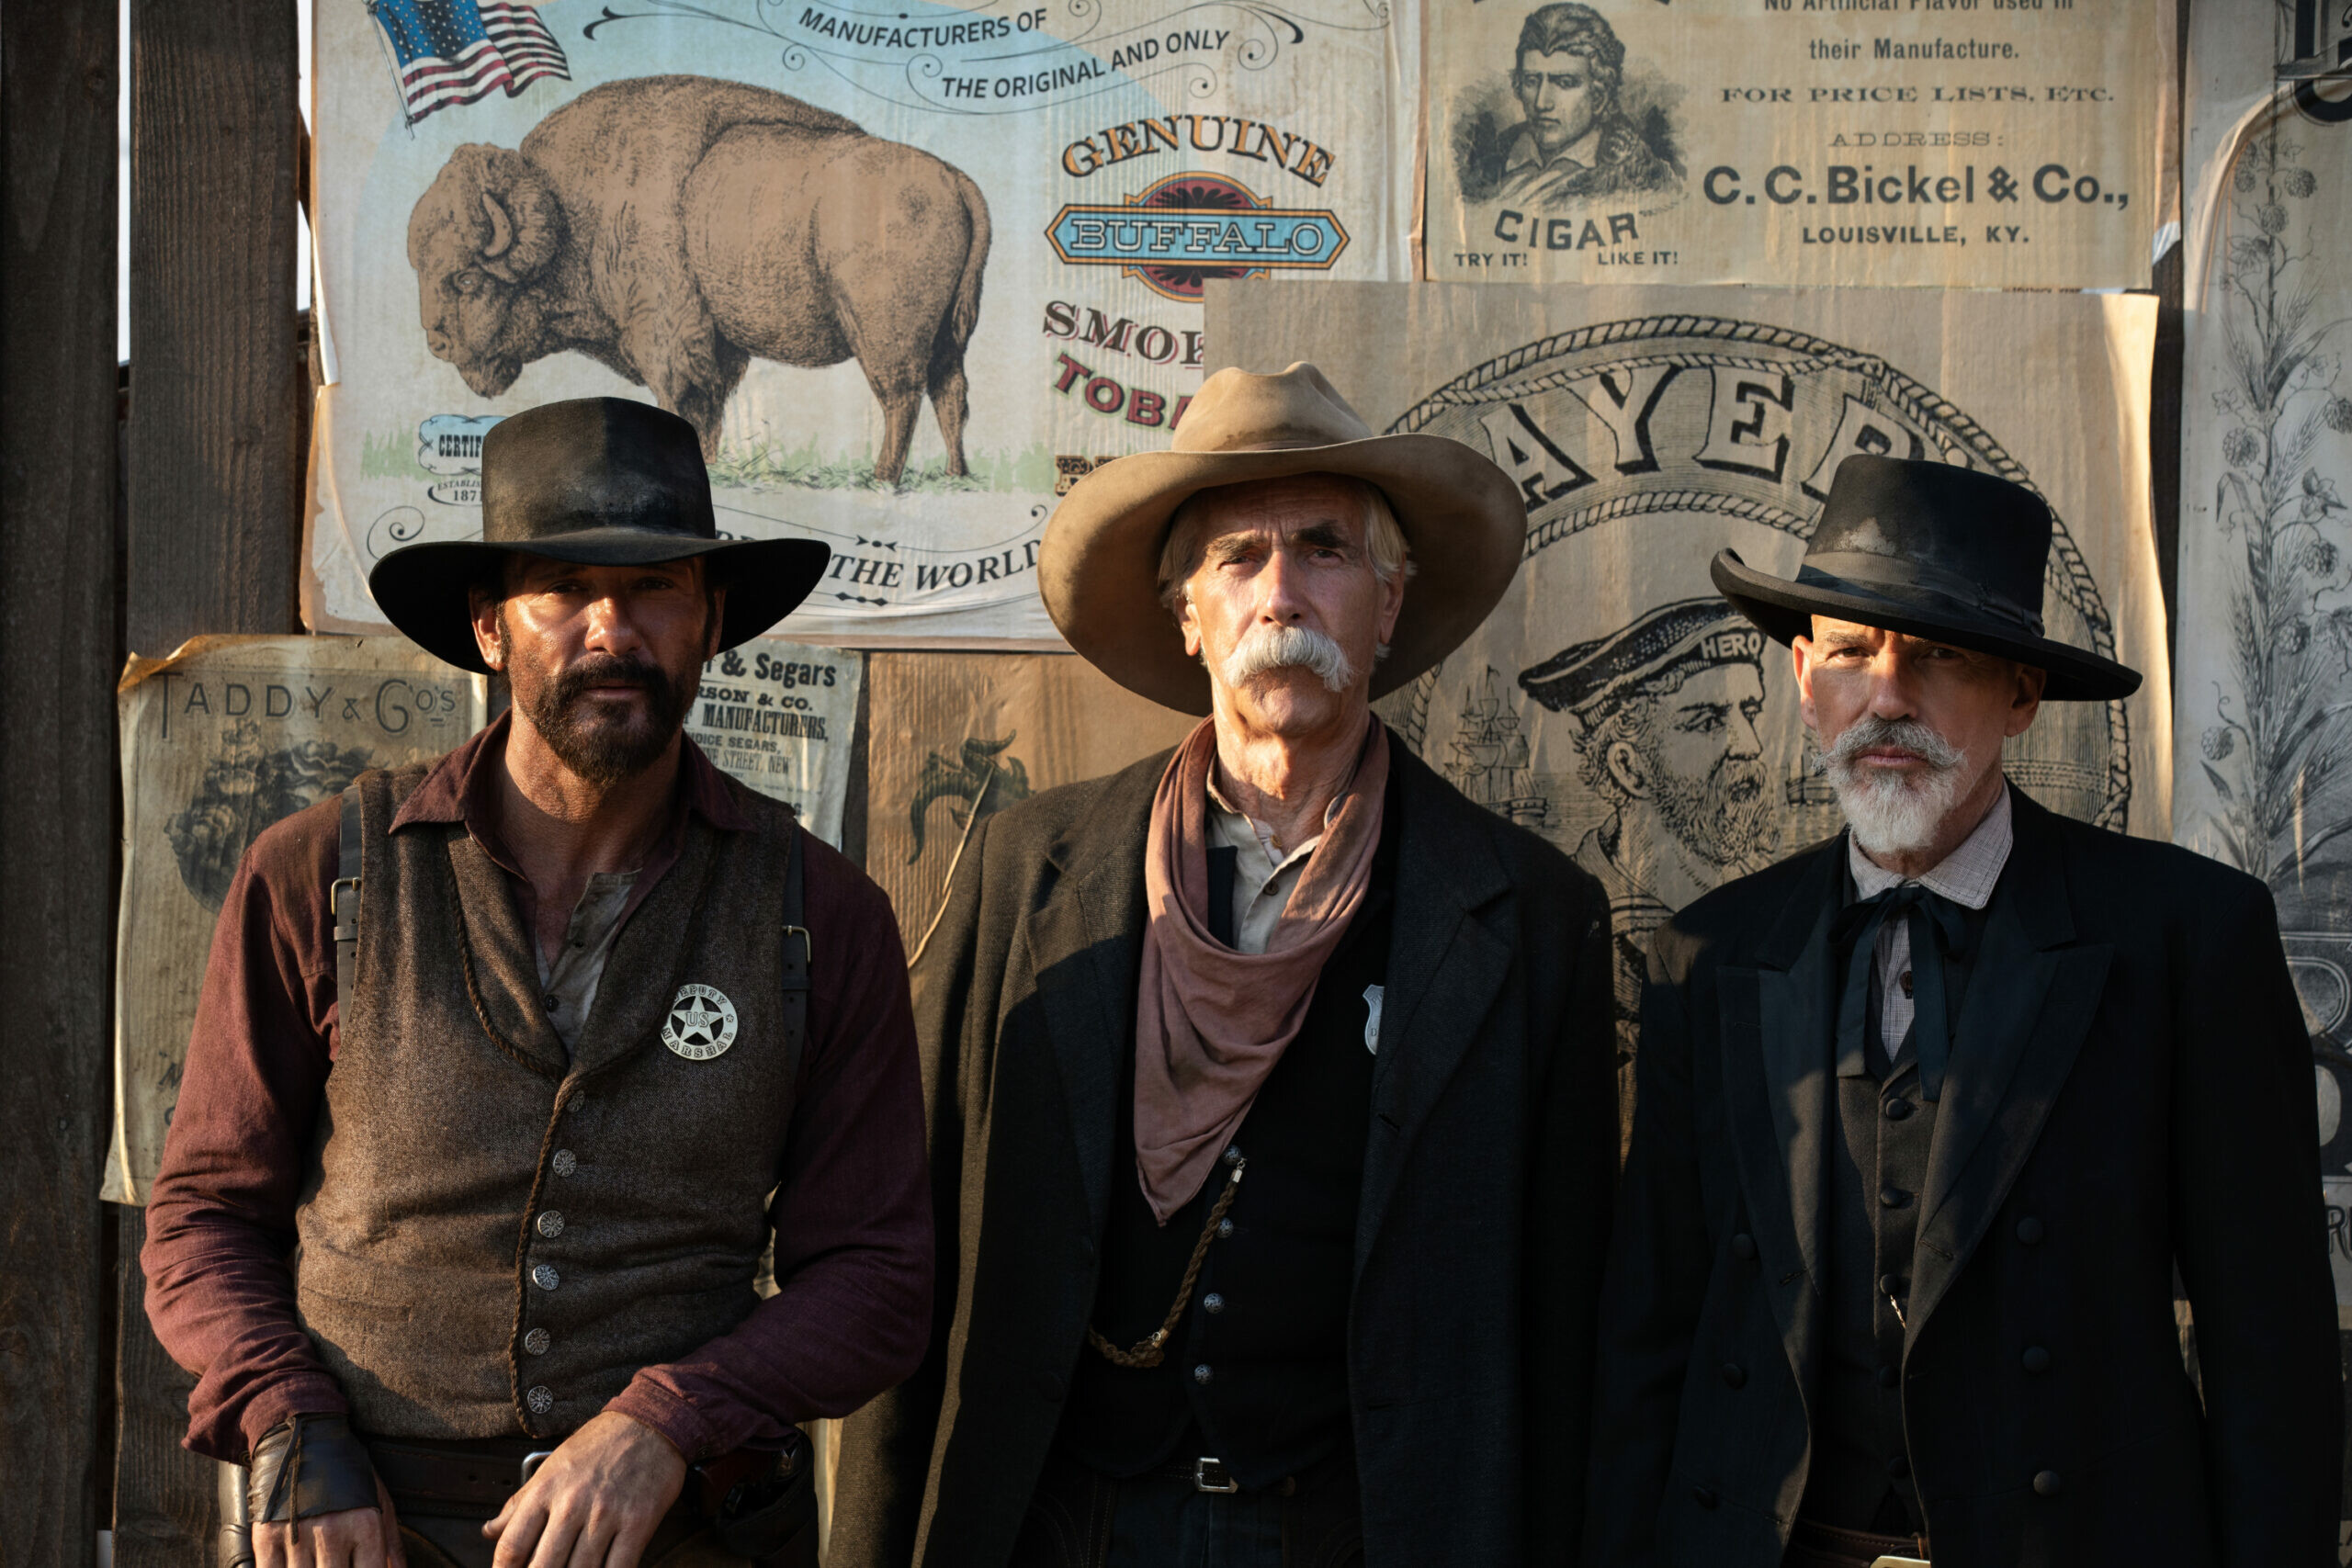 1883 (TV Series): Sam Elliott as Shea Brennan, A former captain who served in the Union Army during the American Civil War. 2560x1710 HD Background.